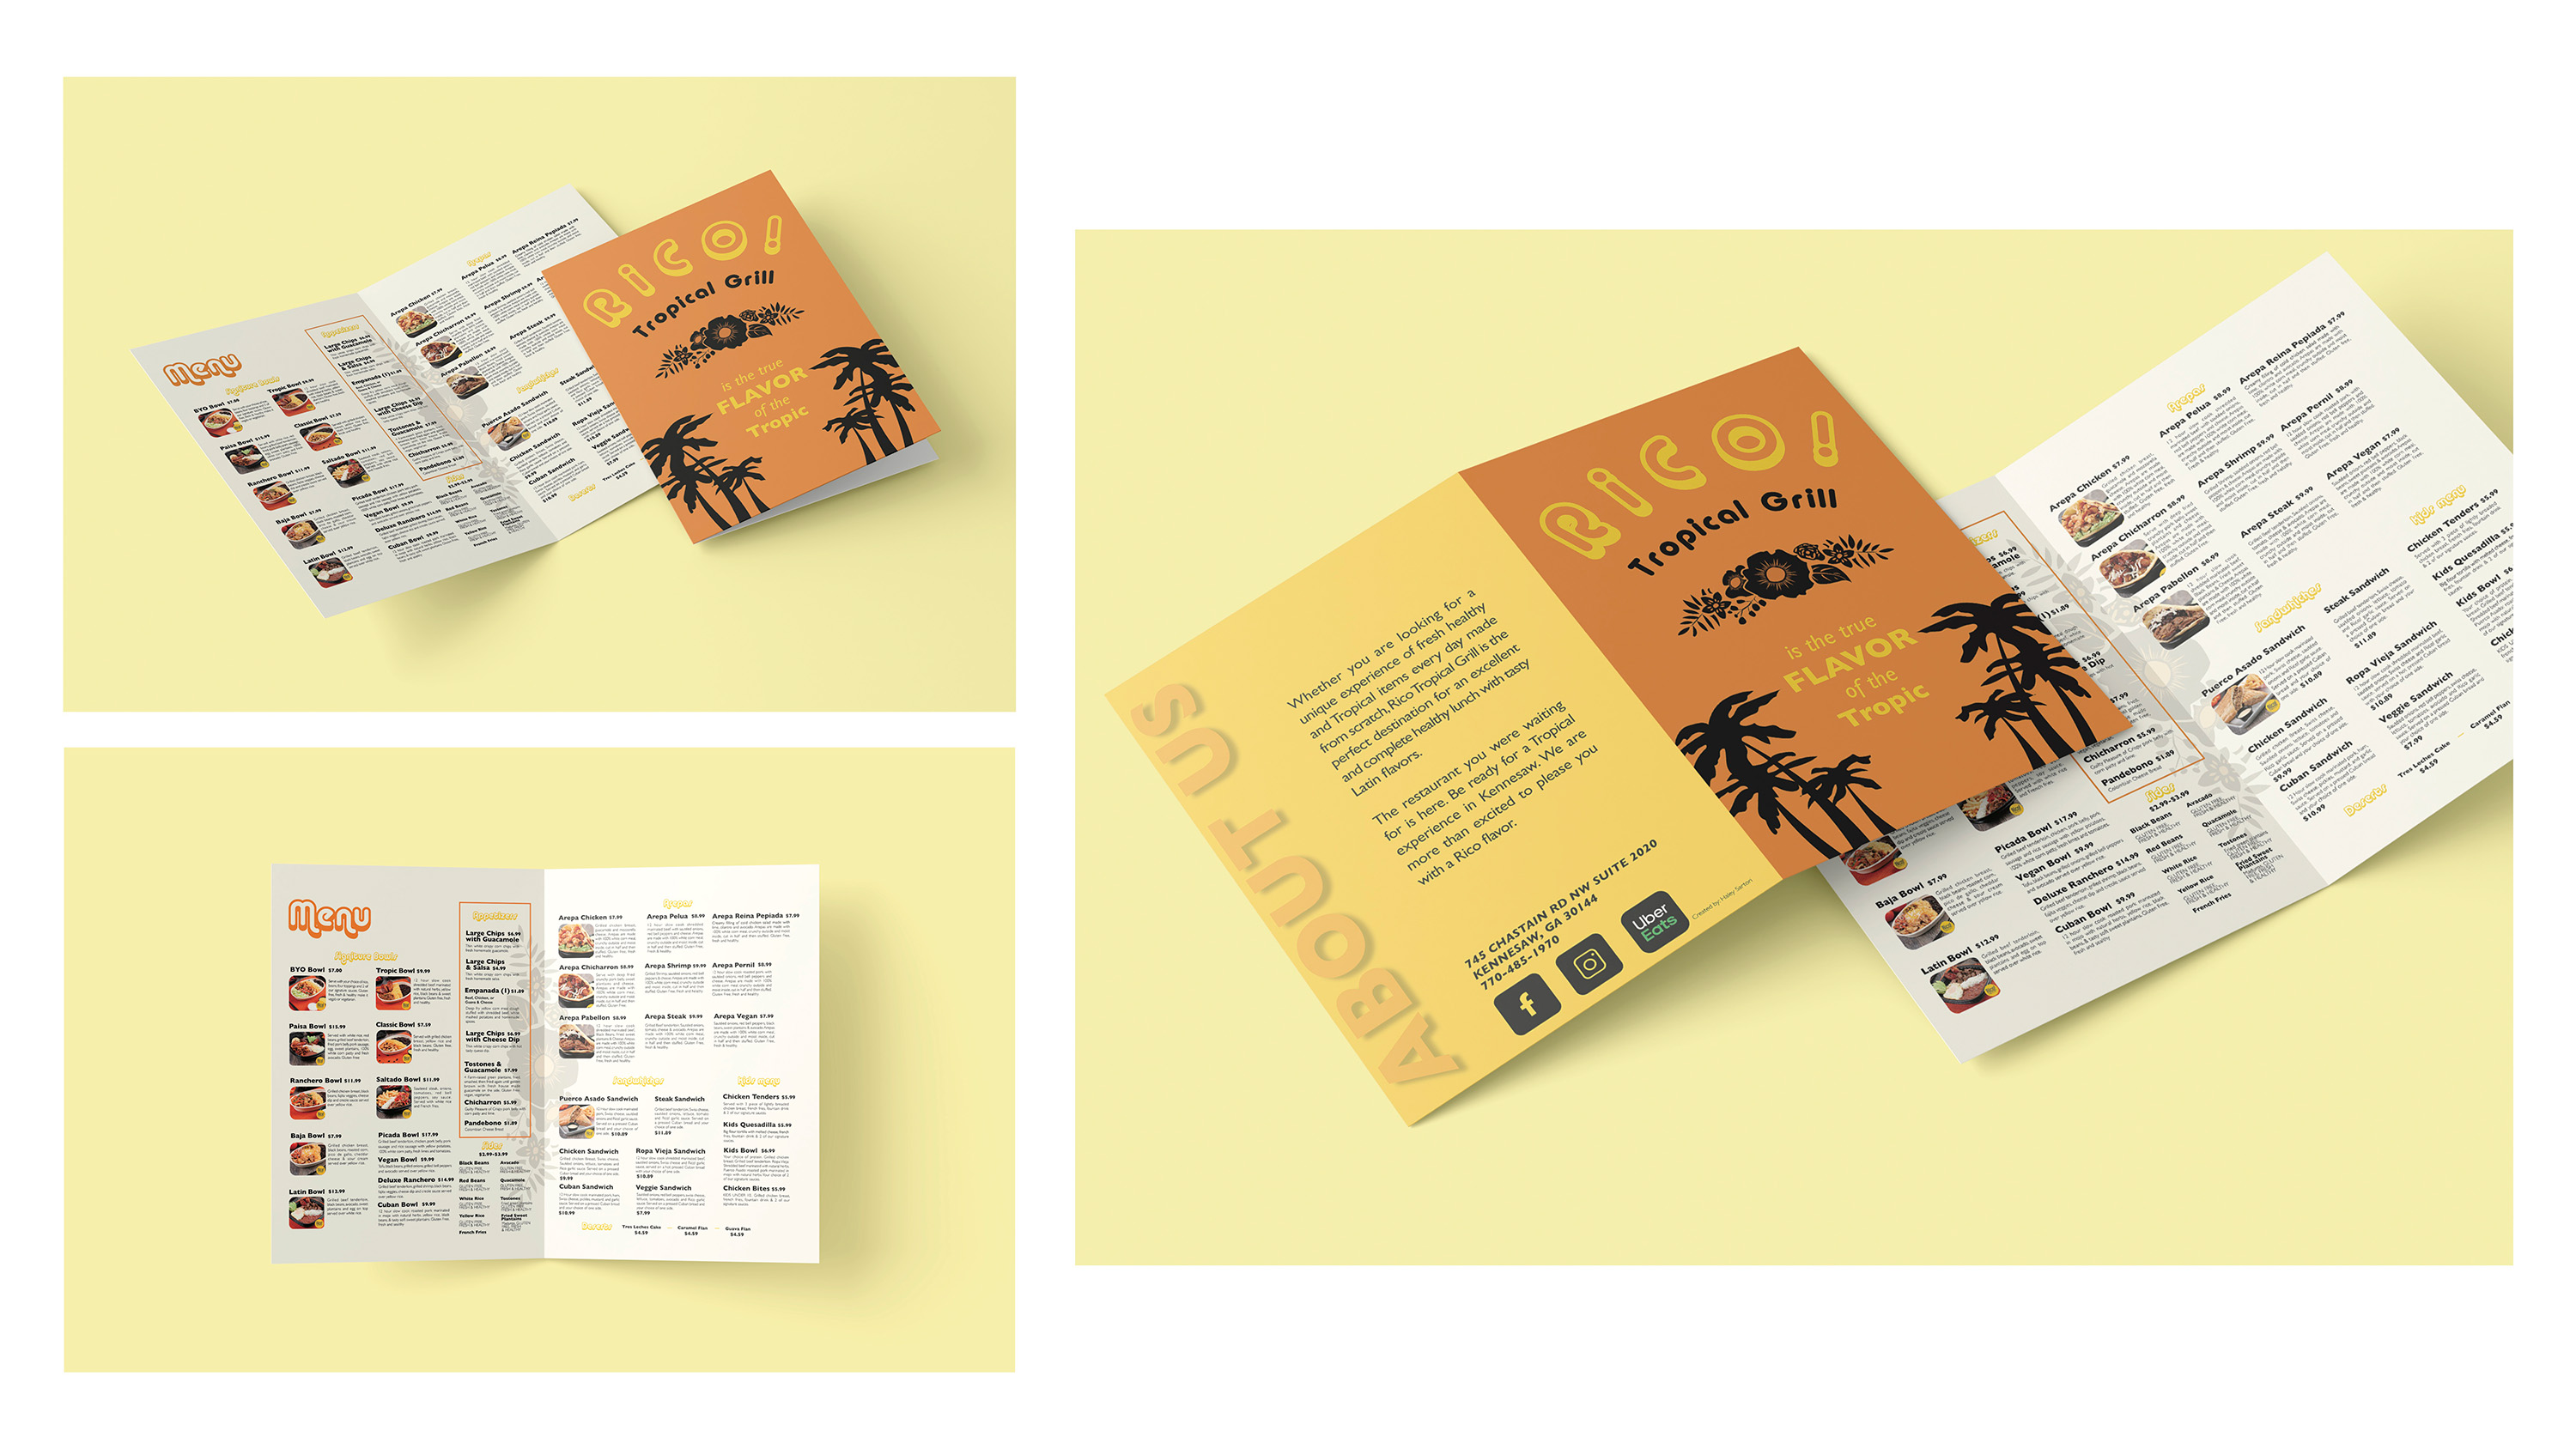 Rico Tropical Grill Menu Redesign / “Rico Tropical Grill Menu Redesign,” Menu 10 x 7in print, 2022. Rico’s menu was lacking in a good quality menu so the goal was to vamp it up and include pictures and more on brand to their restaurant. 